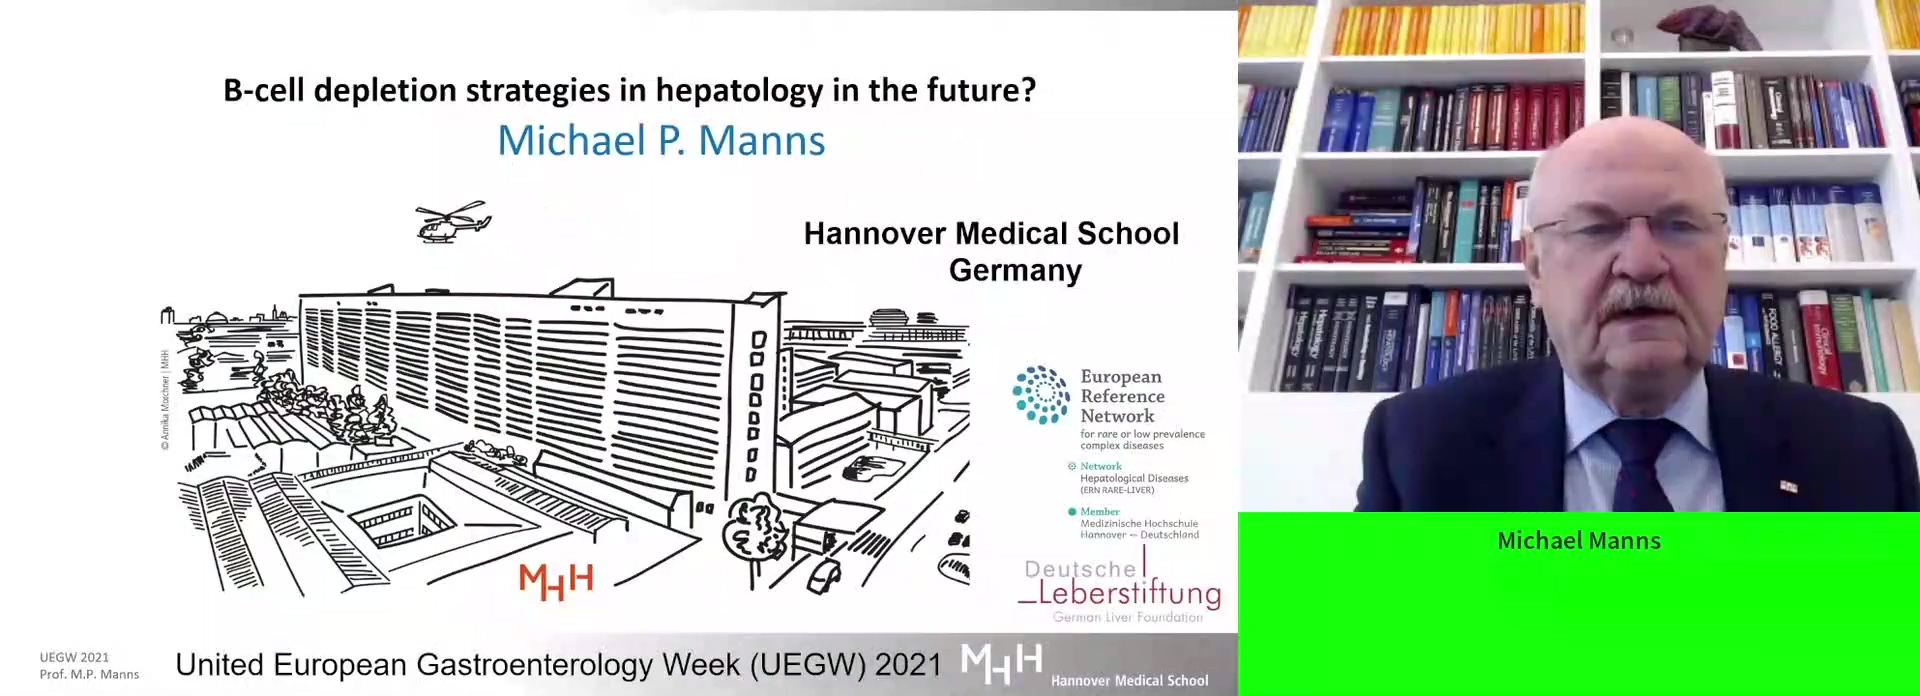 B-cell depletion strategies in hepatology in the future?